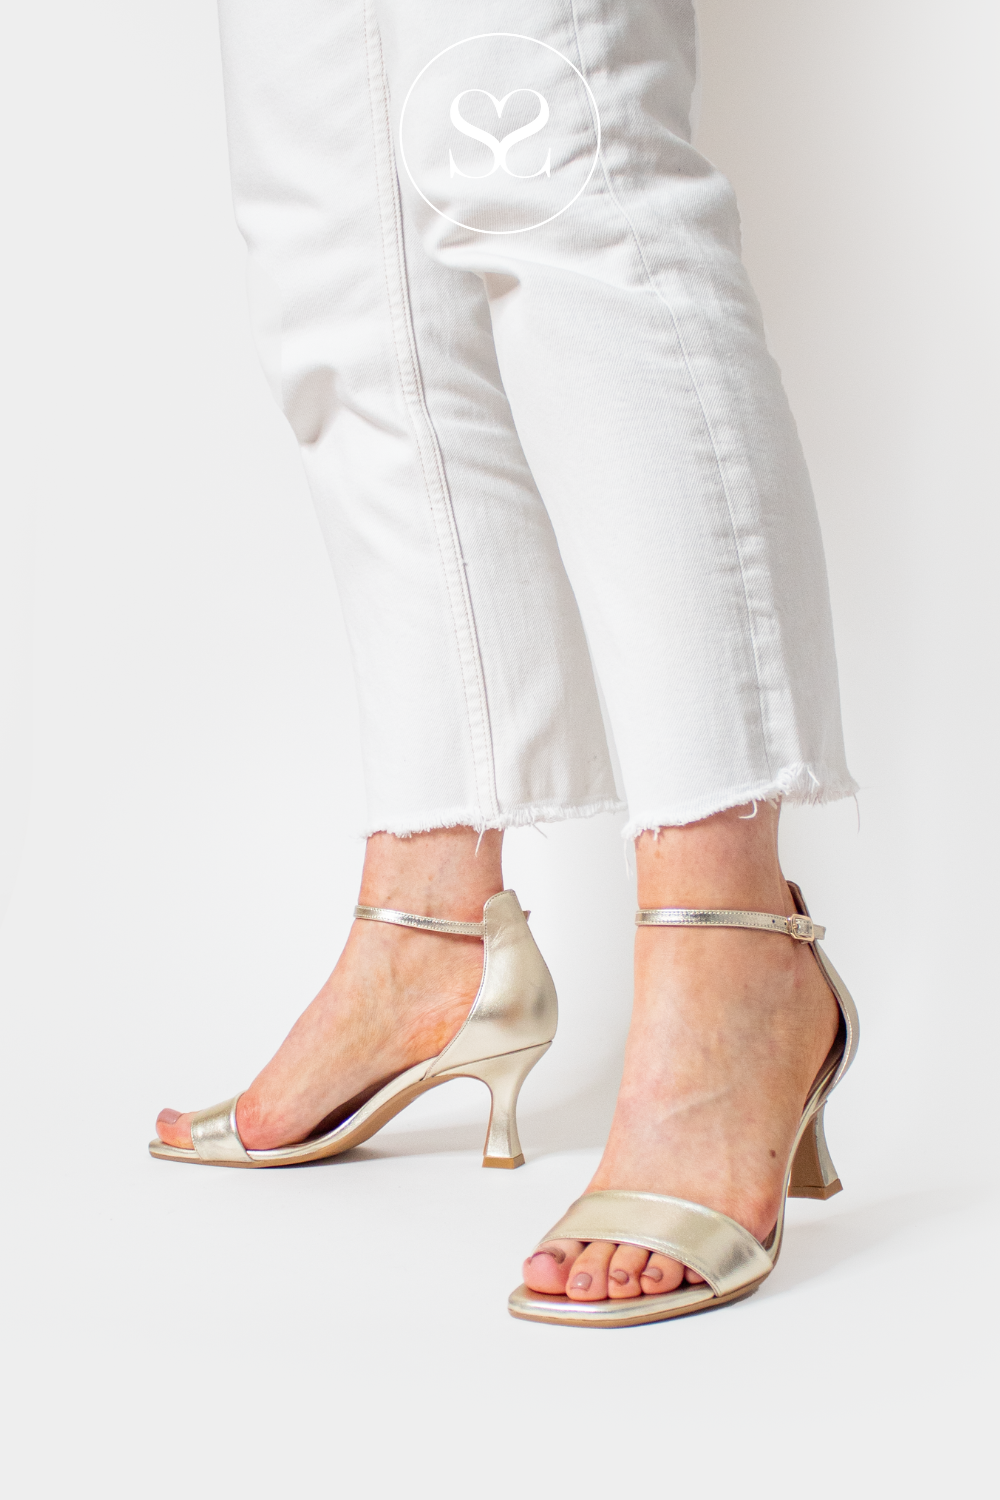 GOLD MID HEEL SANDALS FROM LODI